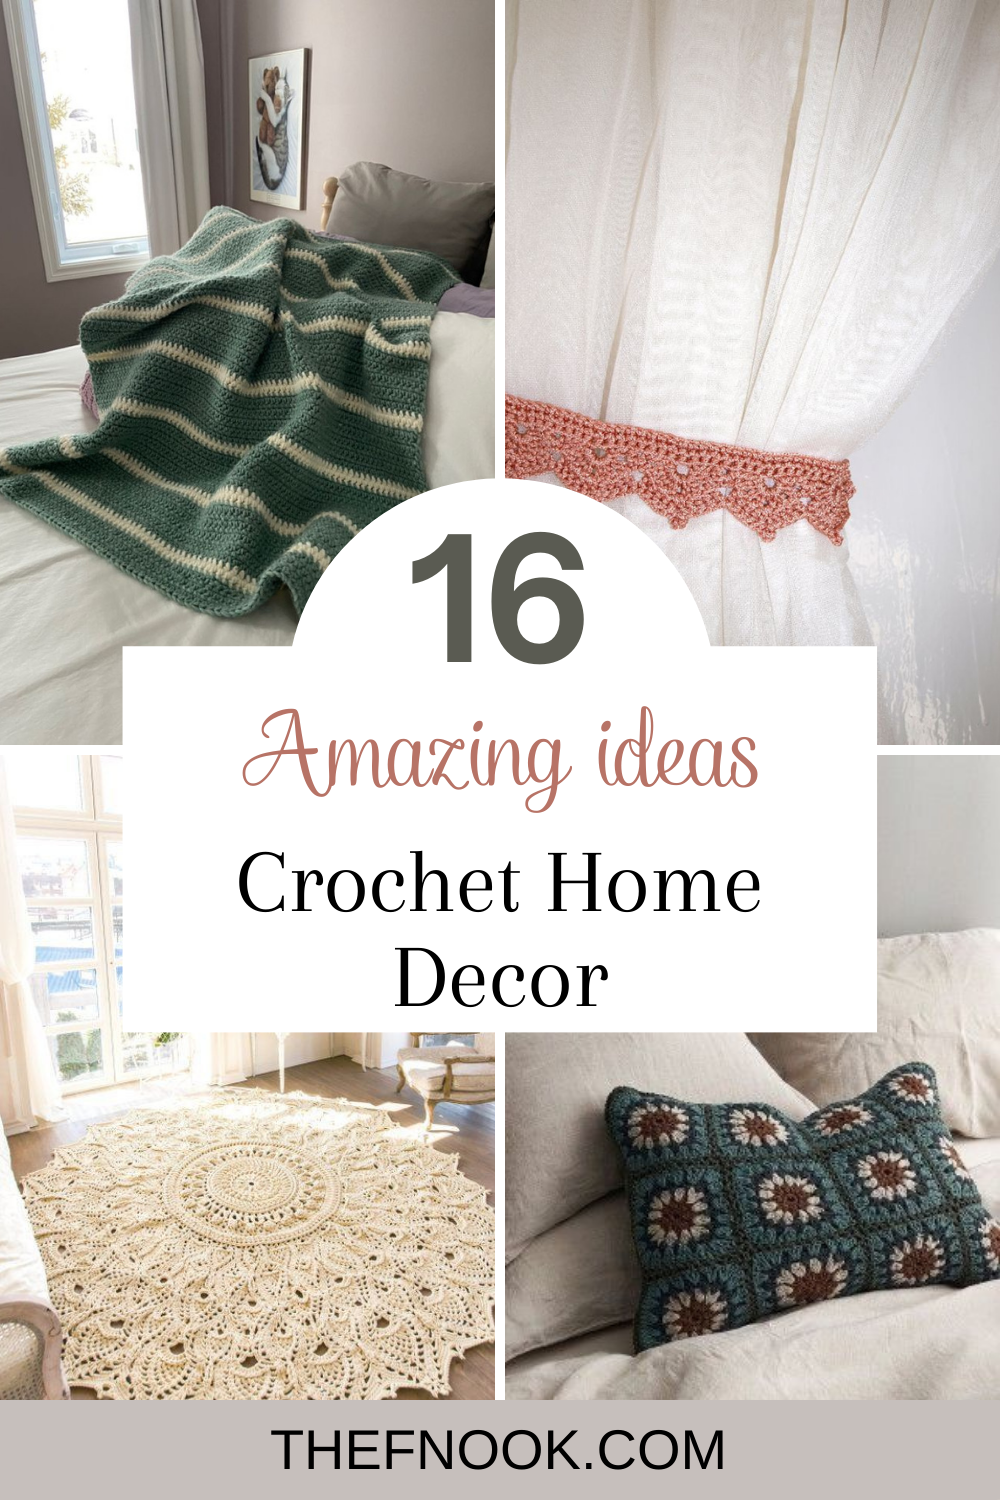 16 Amazing Ideas for the best Crochet Home Decor